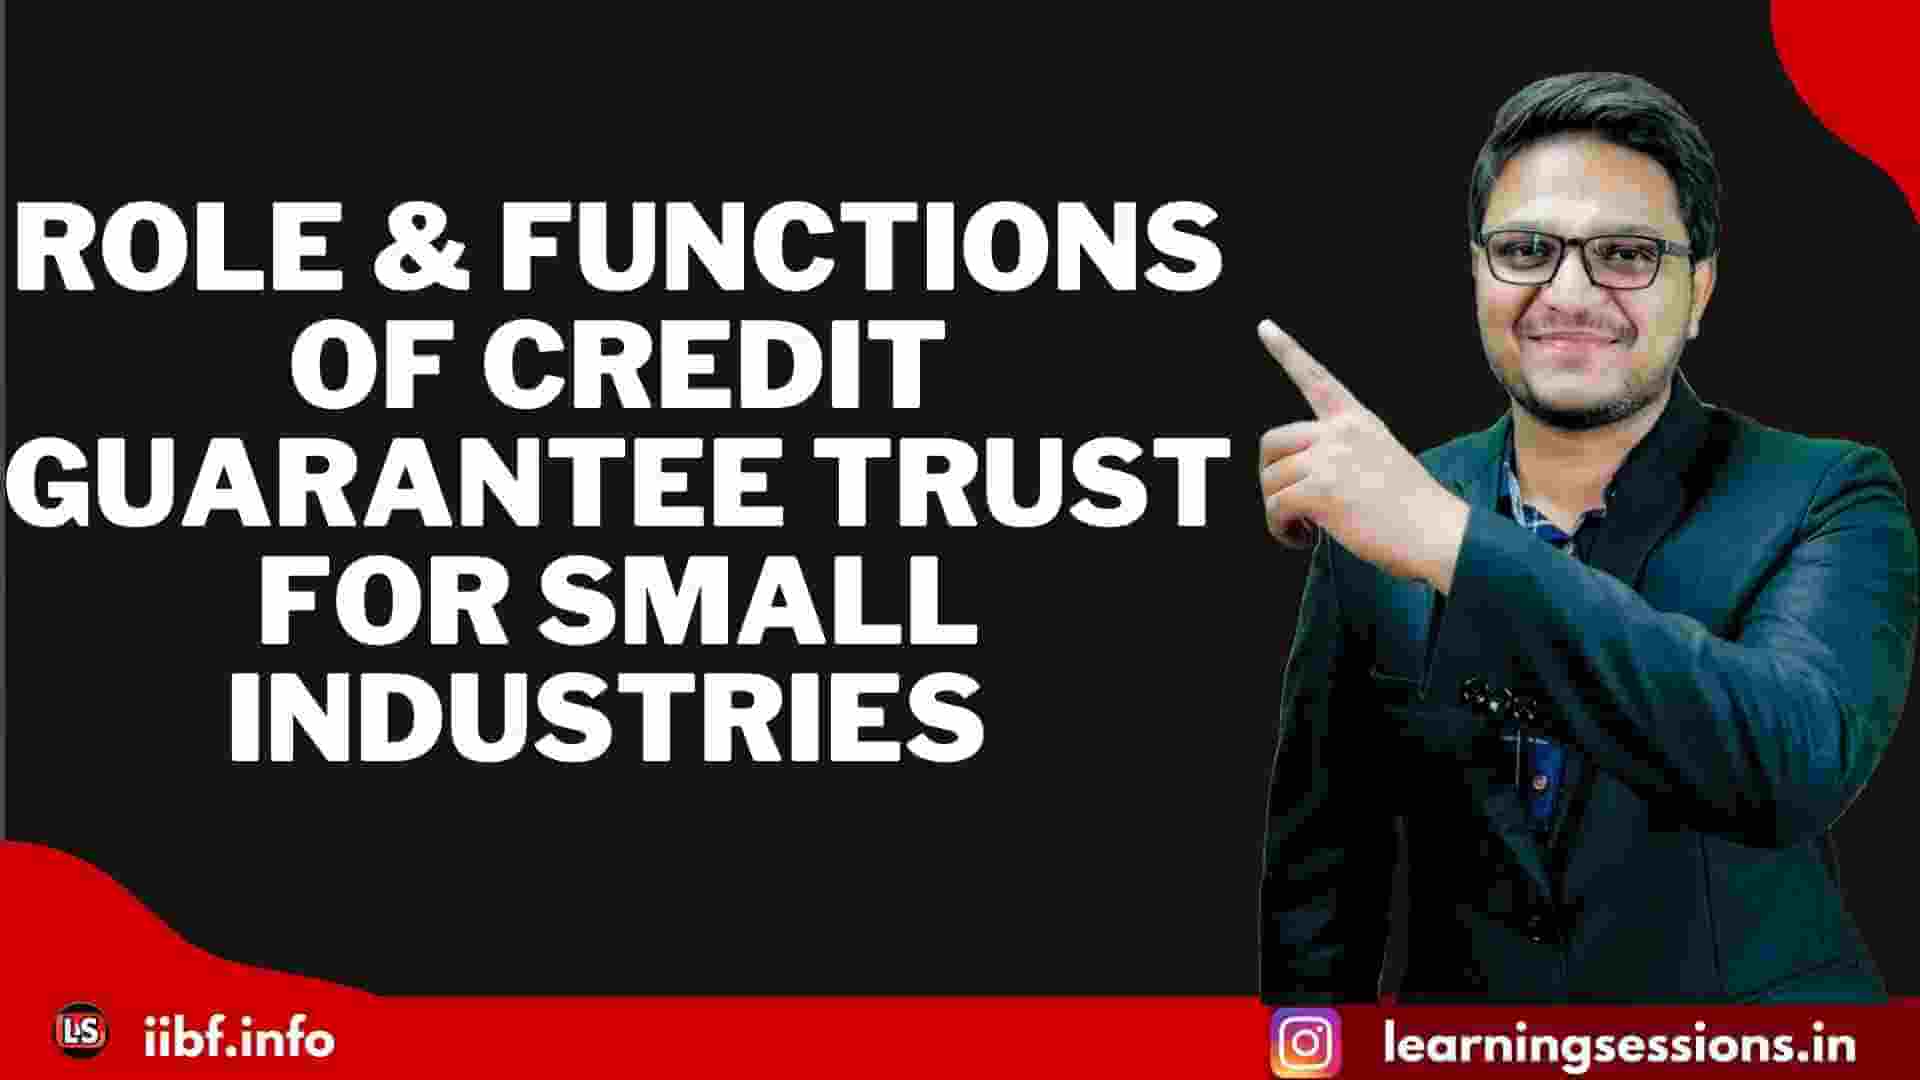 ROLE & FUNCTIONS OF CREDIT GUARANTEE TRUST FOR SMALL INDUSTRIES 